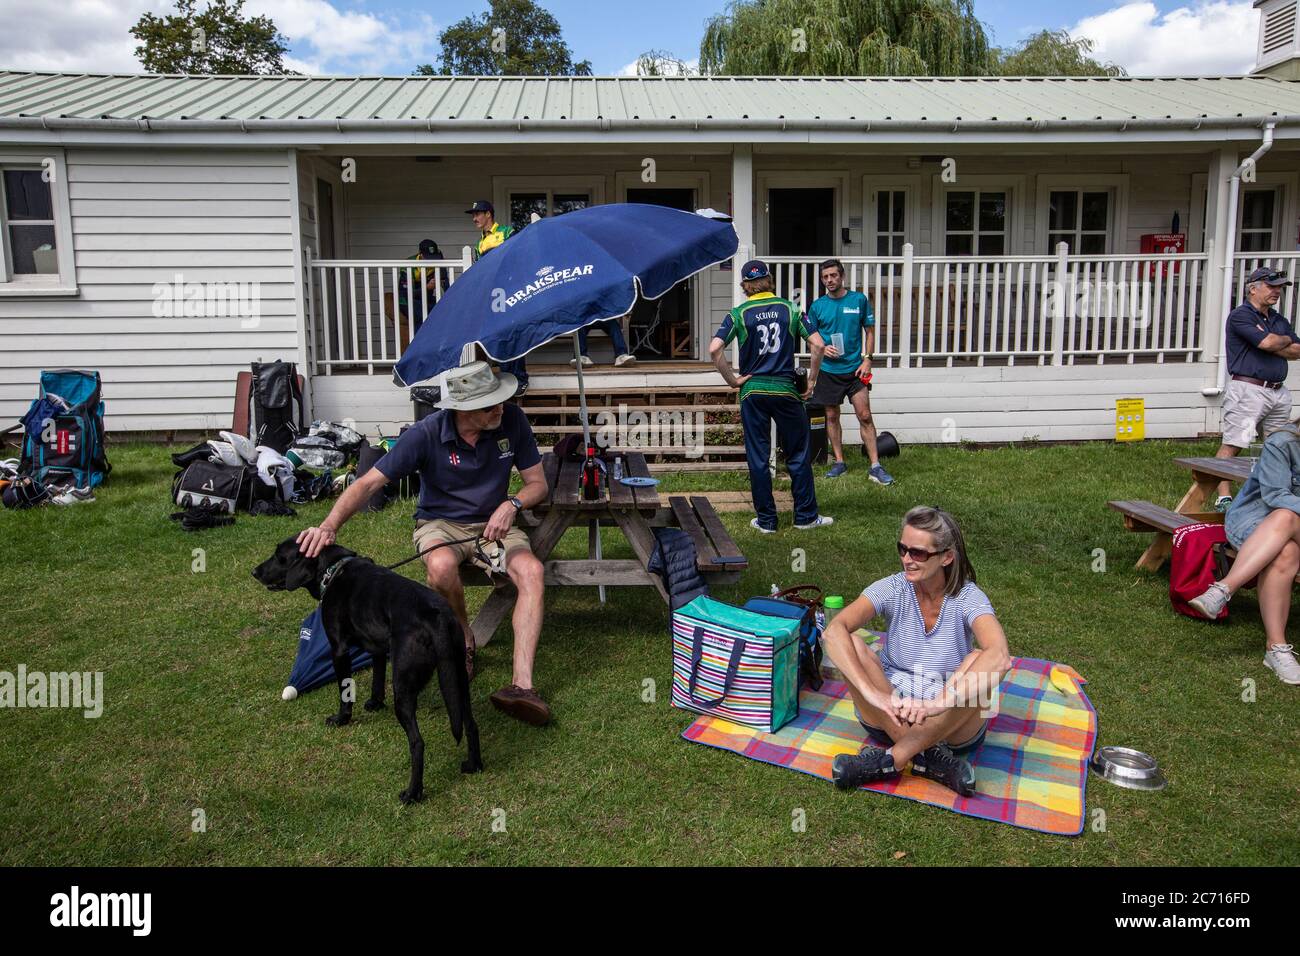 Spectators return to Henley Cricket Club to watch their local club cricketers play Wargrave as the season begins after the coronavirus lockdown, UK Stock Photo